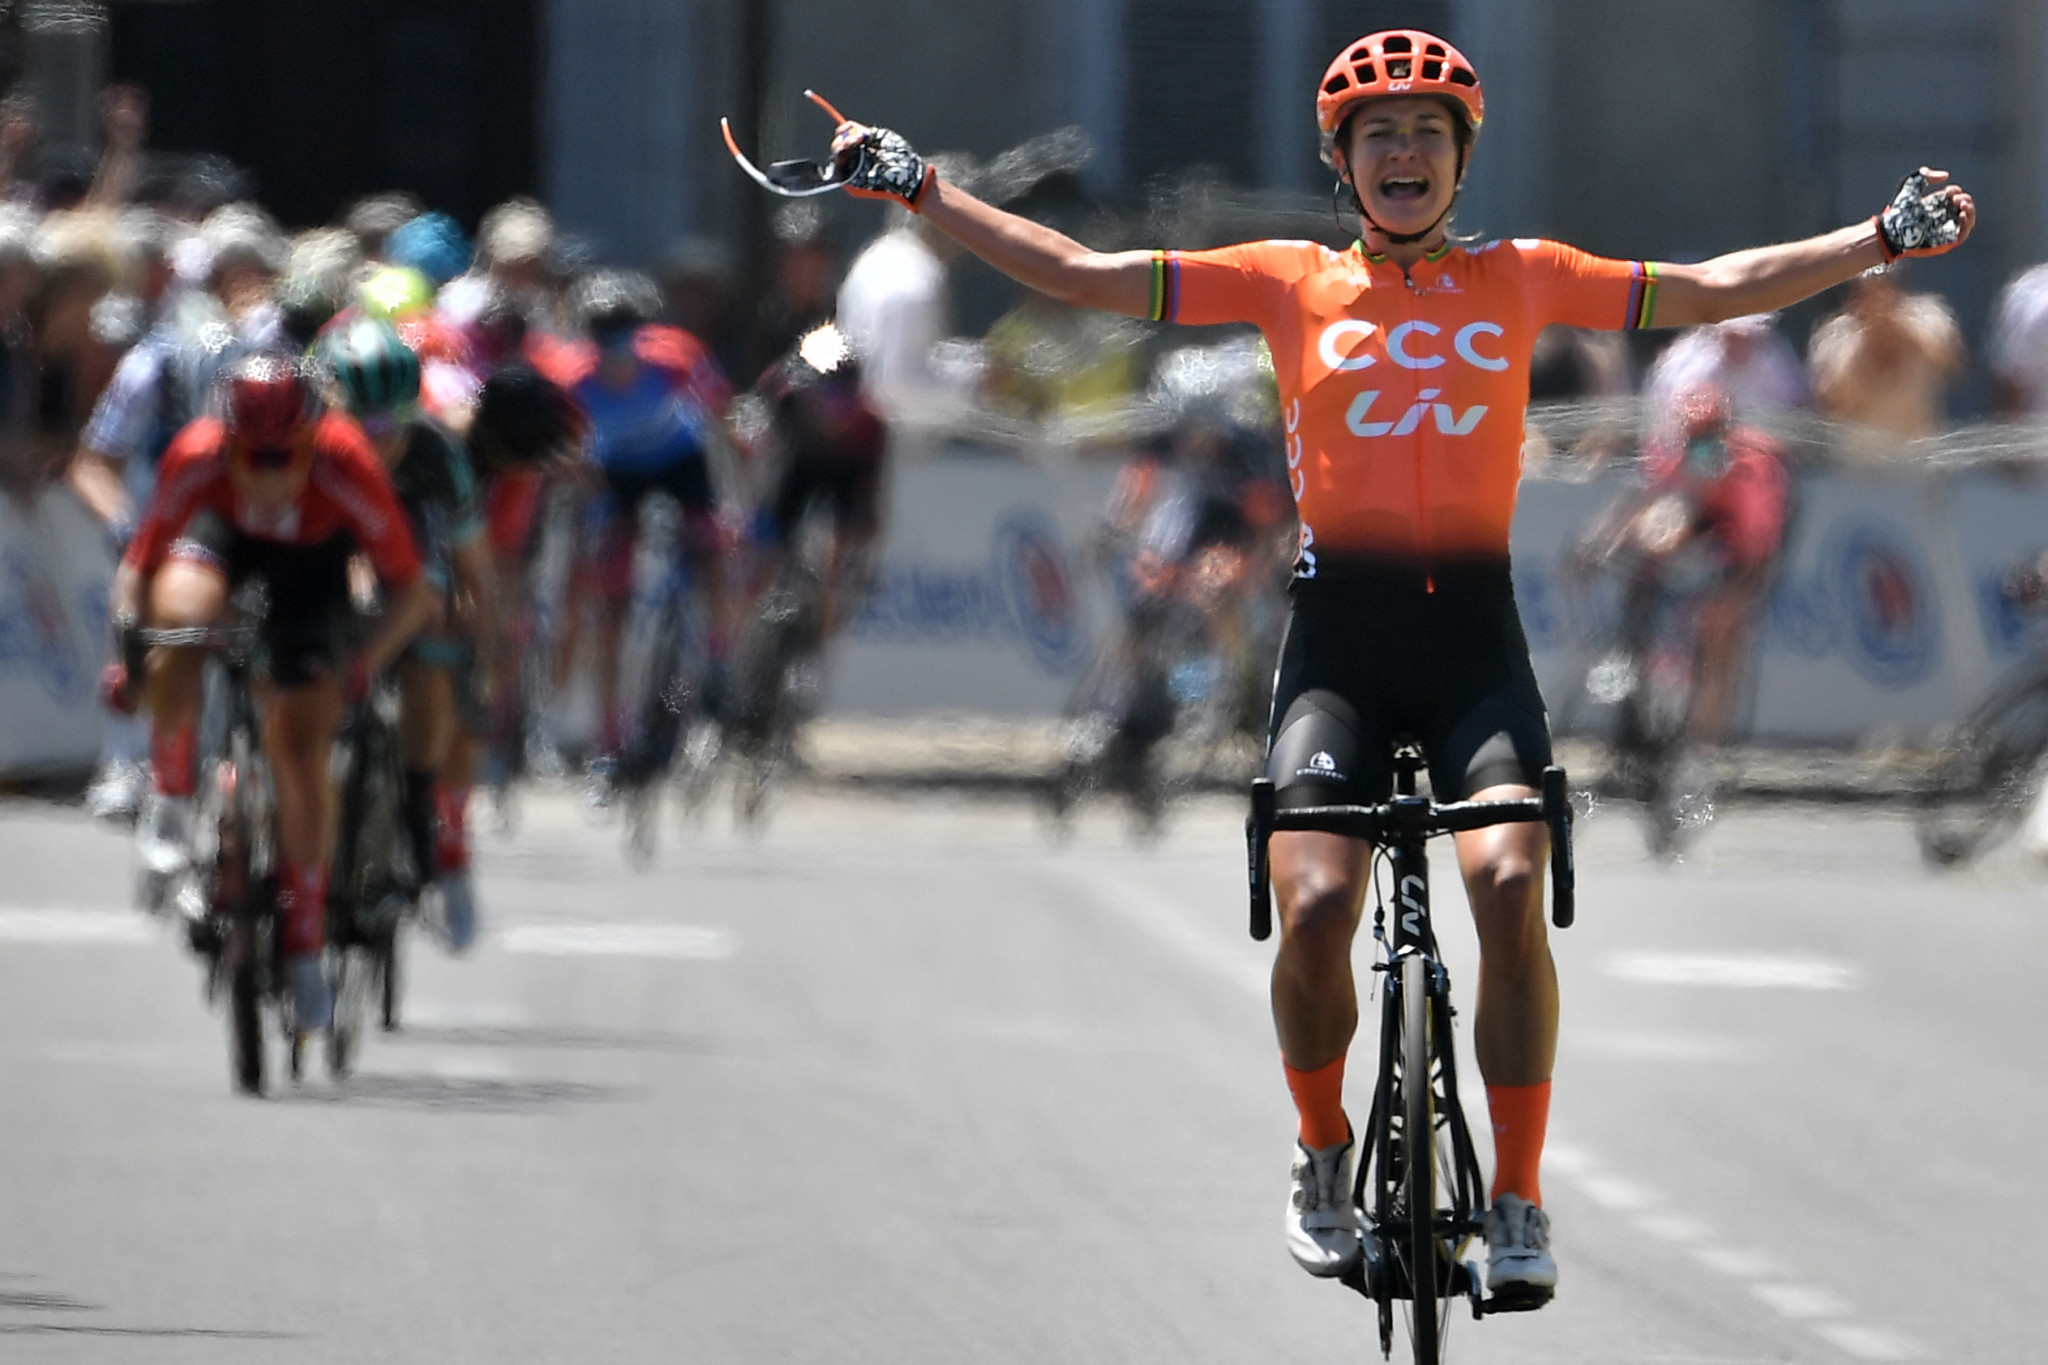 The Netherlands' Marianne Vos claimed her second La Course title with a sensational late surge up the final climb in Pau today ©Getty Images